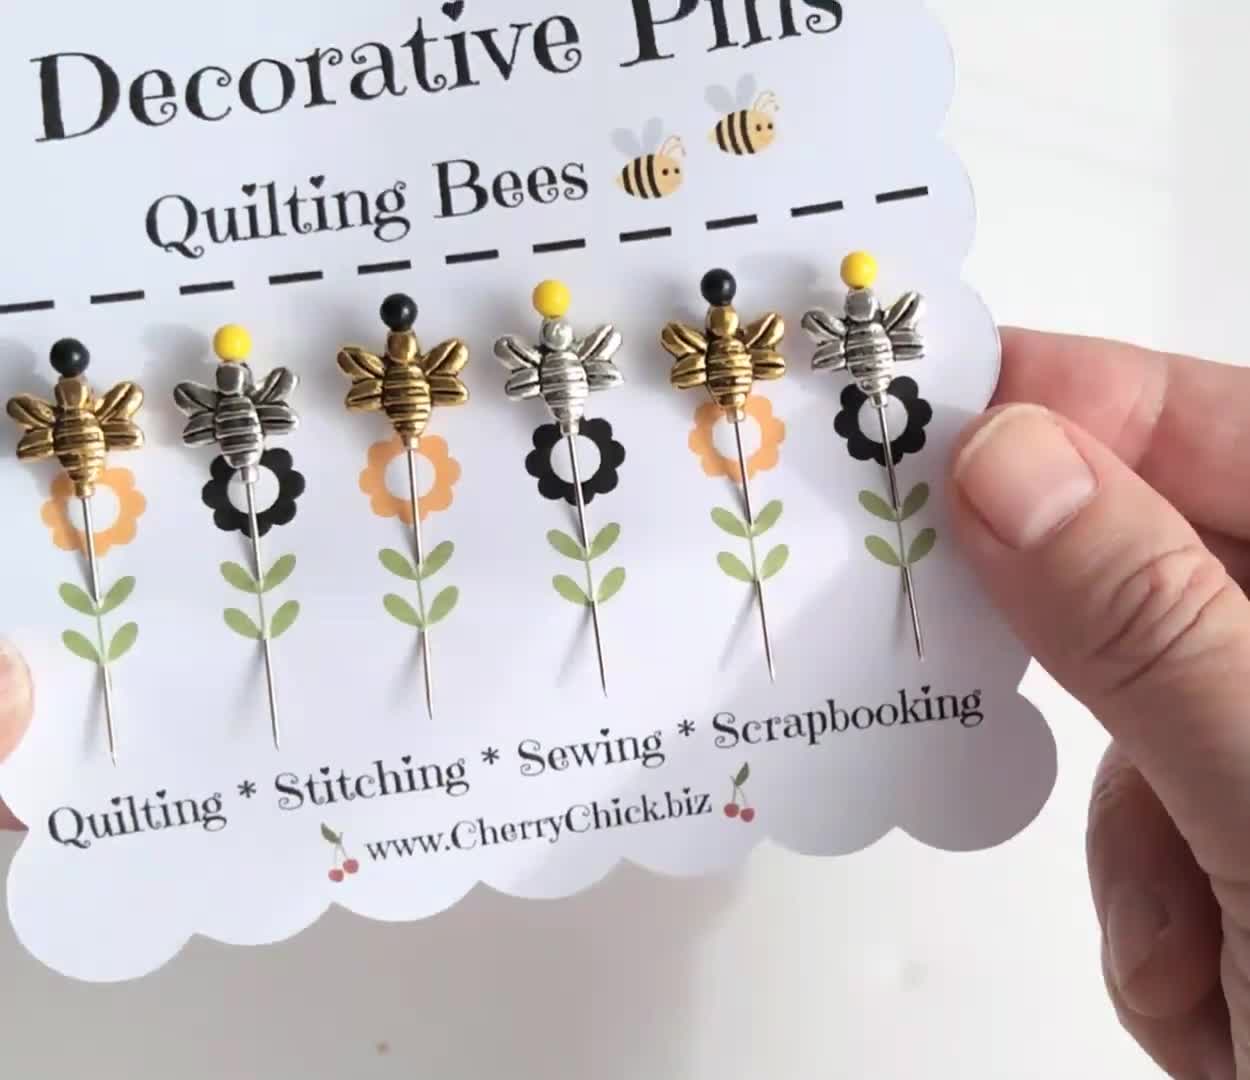 Decorative Bee Pins Decorative Sewing Pins Bee Pins Quilting Pins  Scrapbooking Pin Gift for Quilters Pretty Pins 